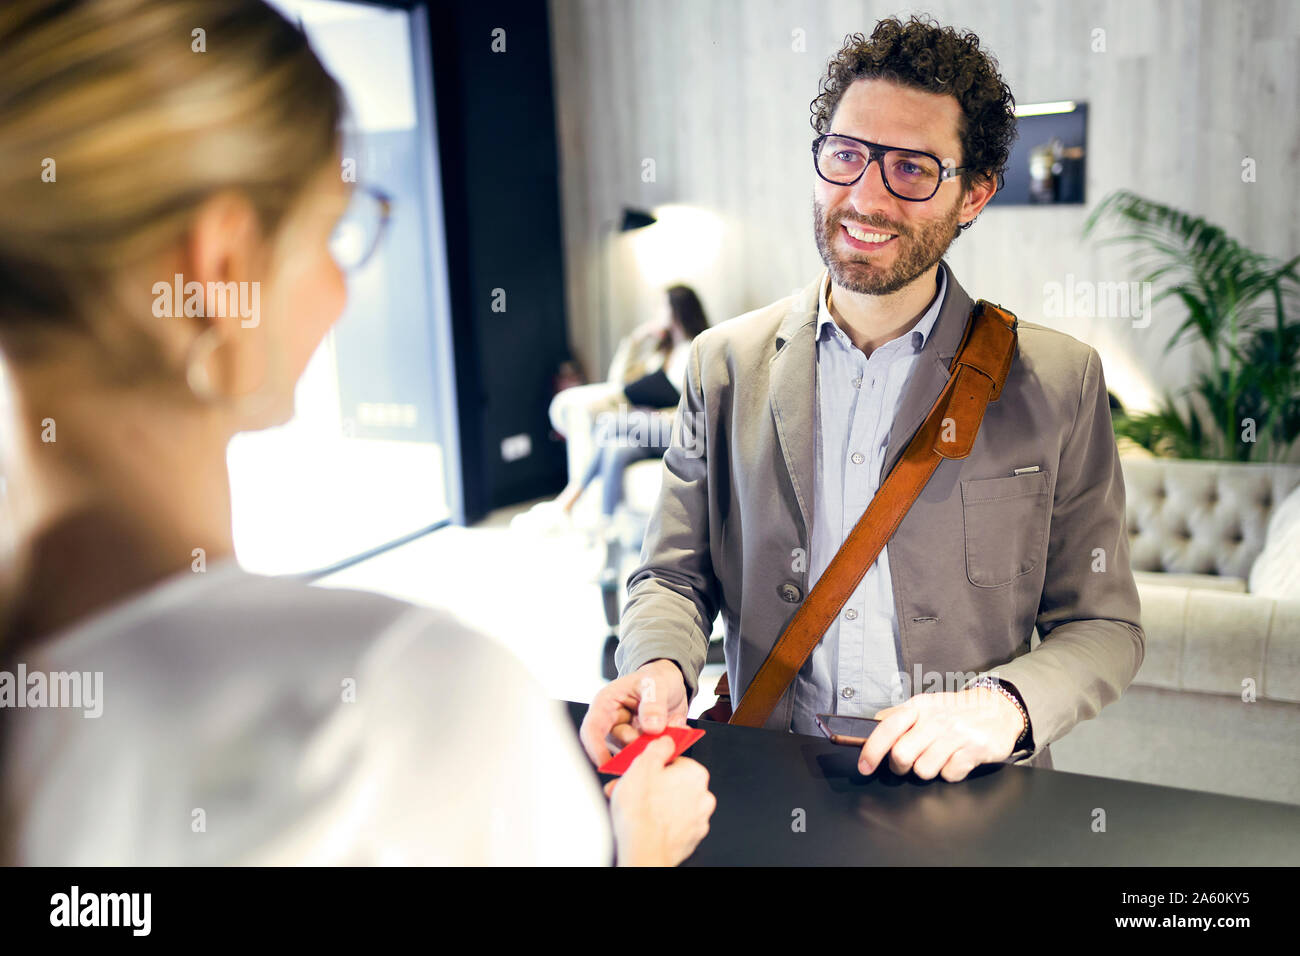 Smiling businessman handing over credit card at reception Stock Photo